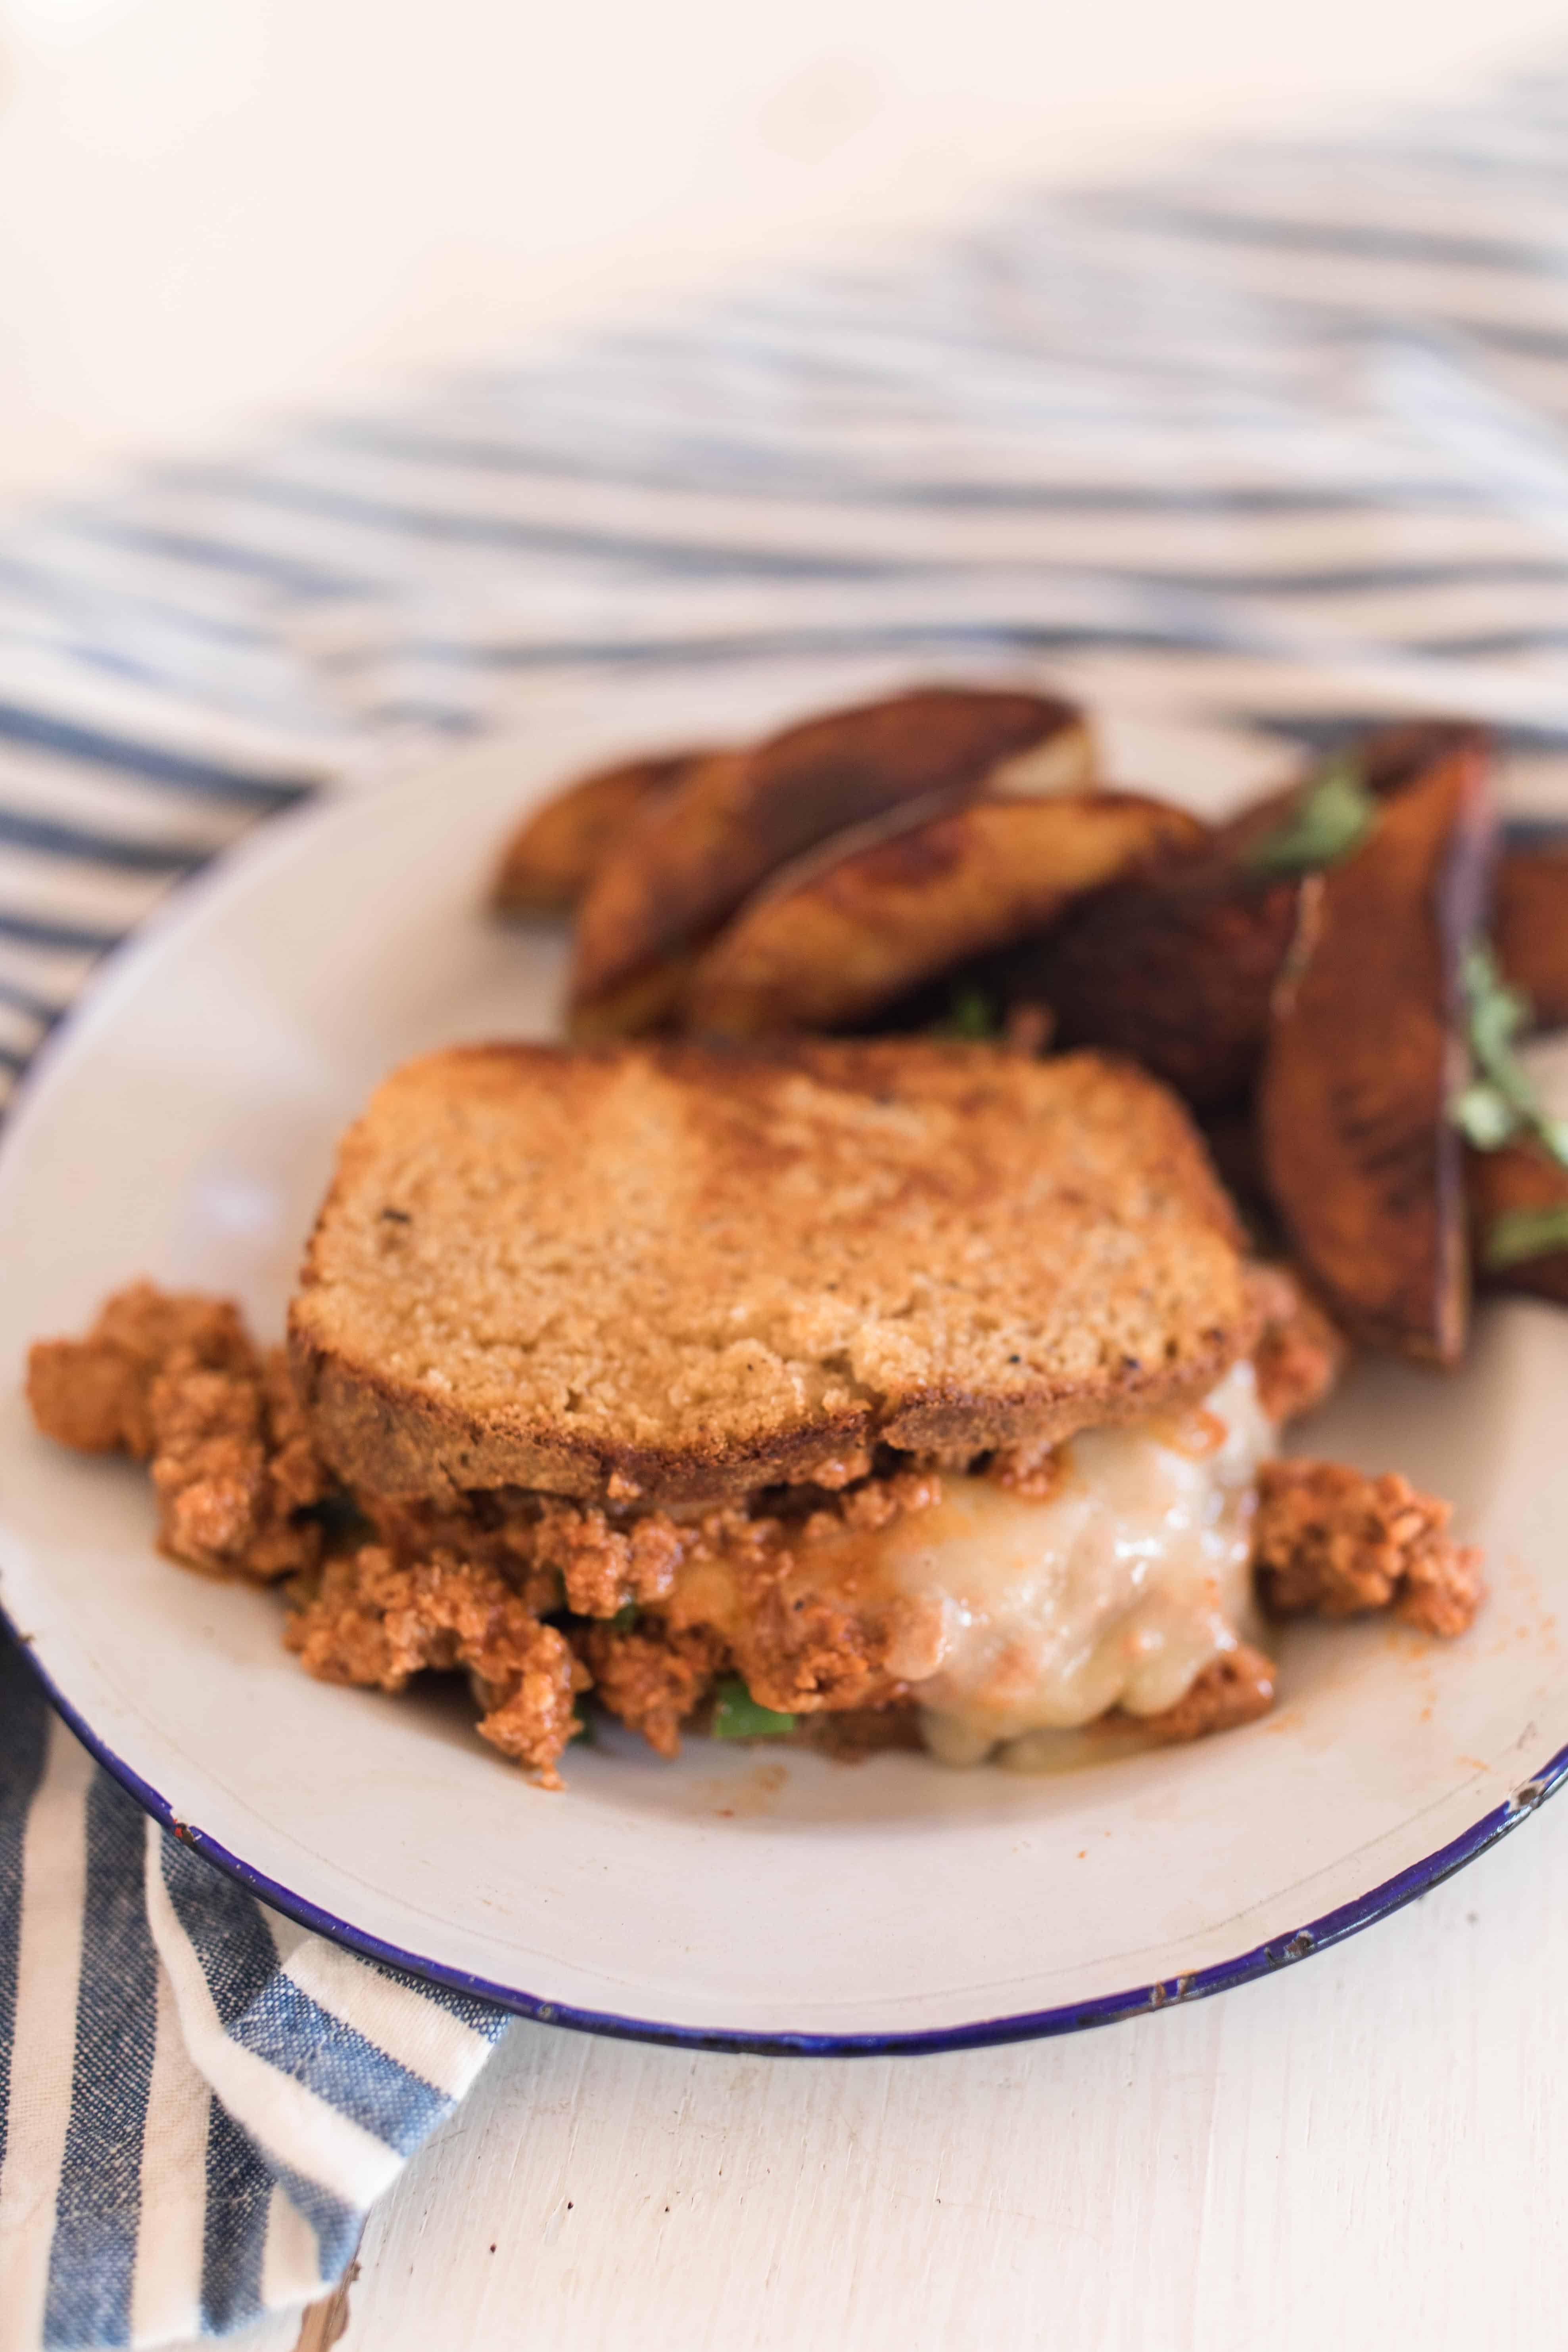 Turkey sloppy joes made with healthy ingredients